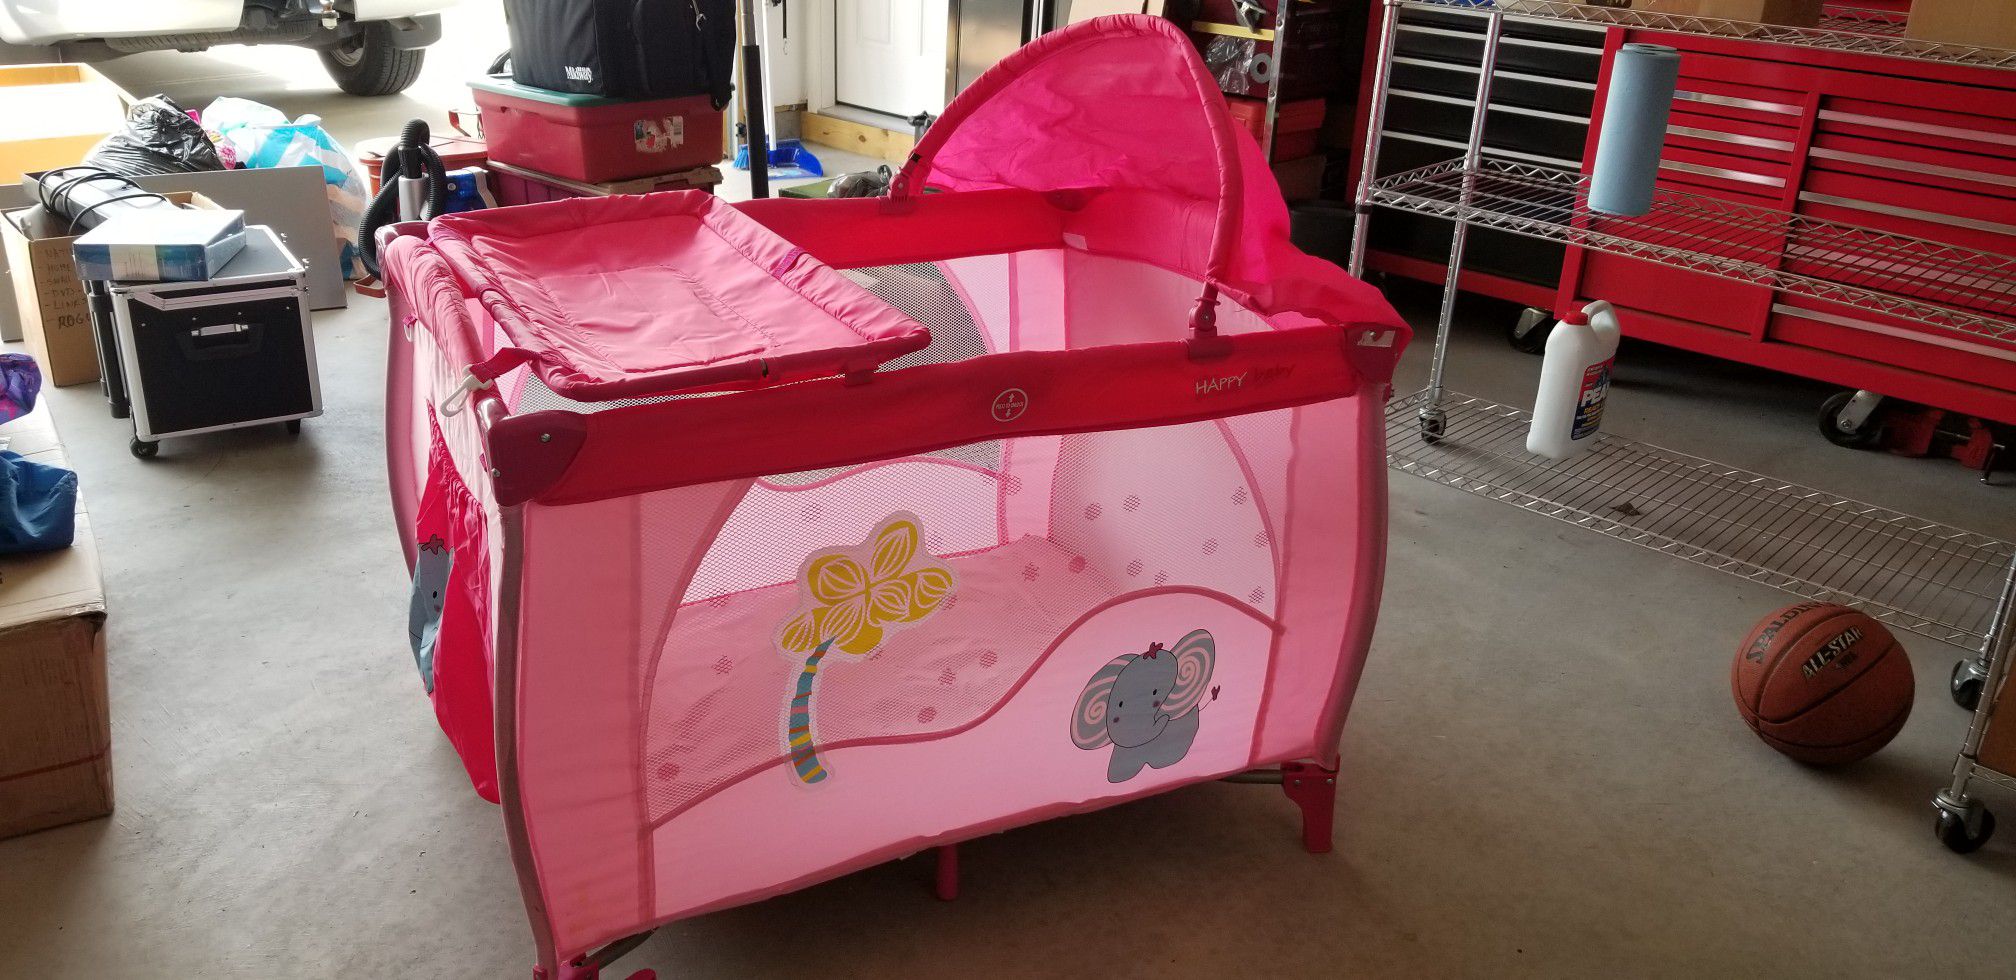 Portable Baby Play Yard, Removable bassinet, Changing Table